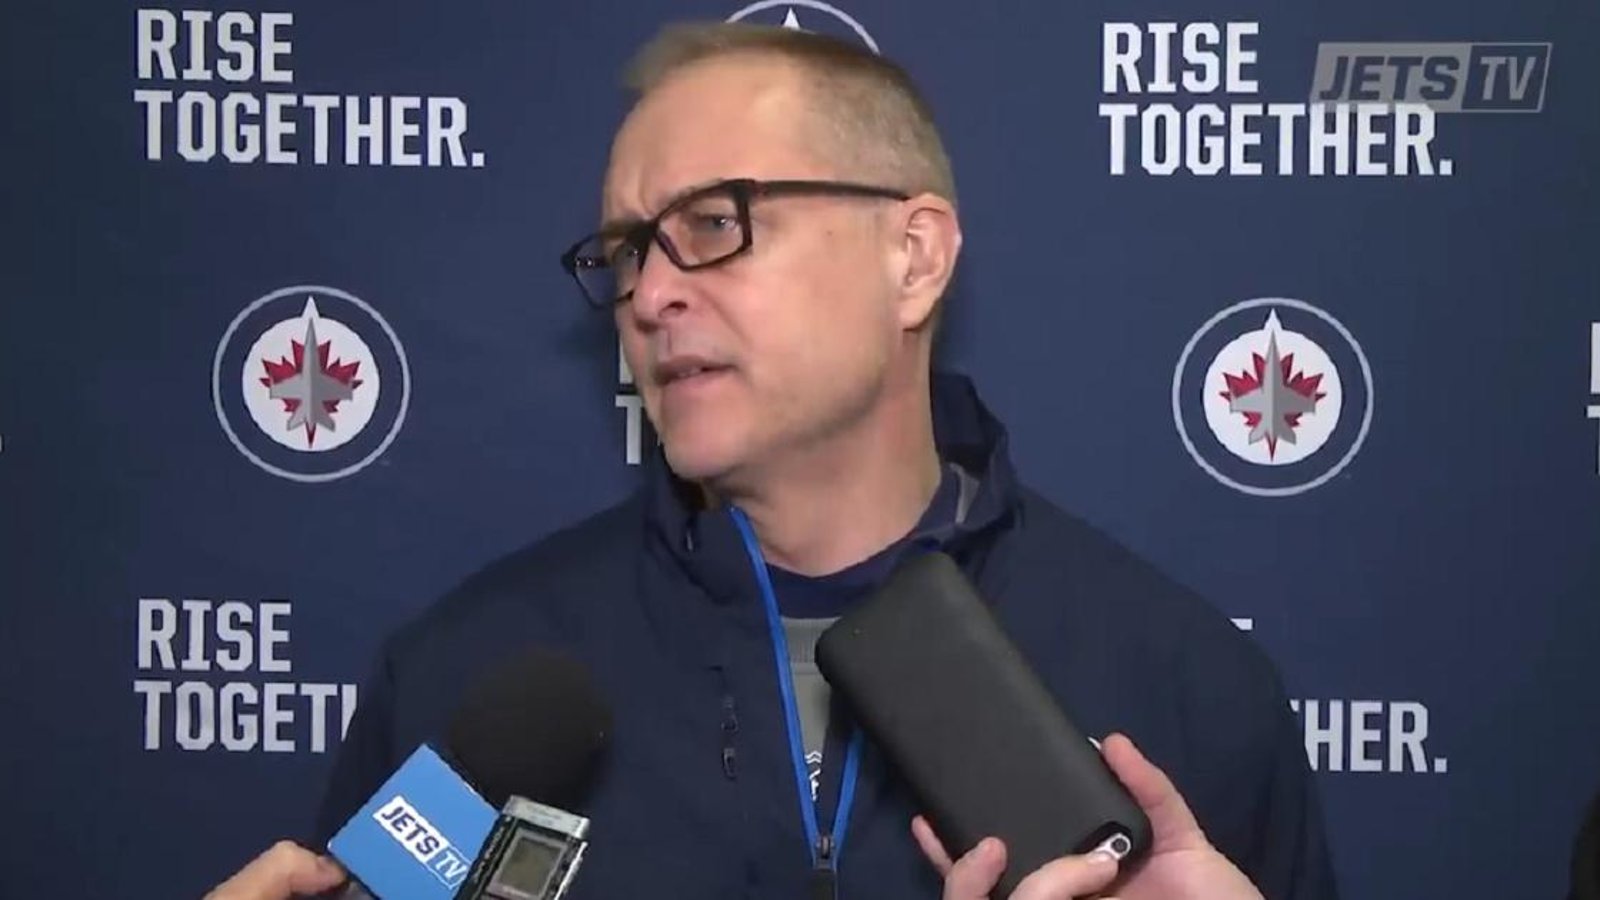 Paul Maurice DESTROYS rival players for being divas.